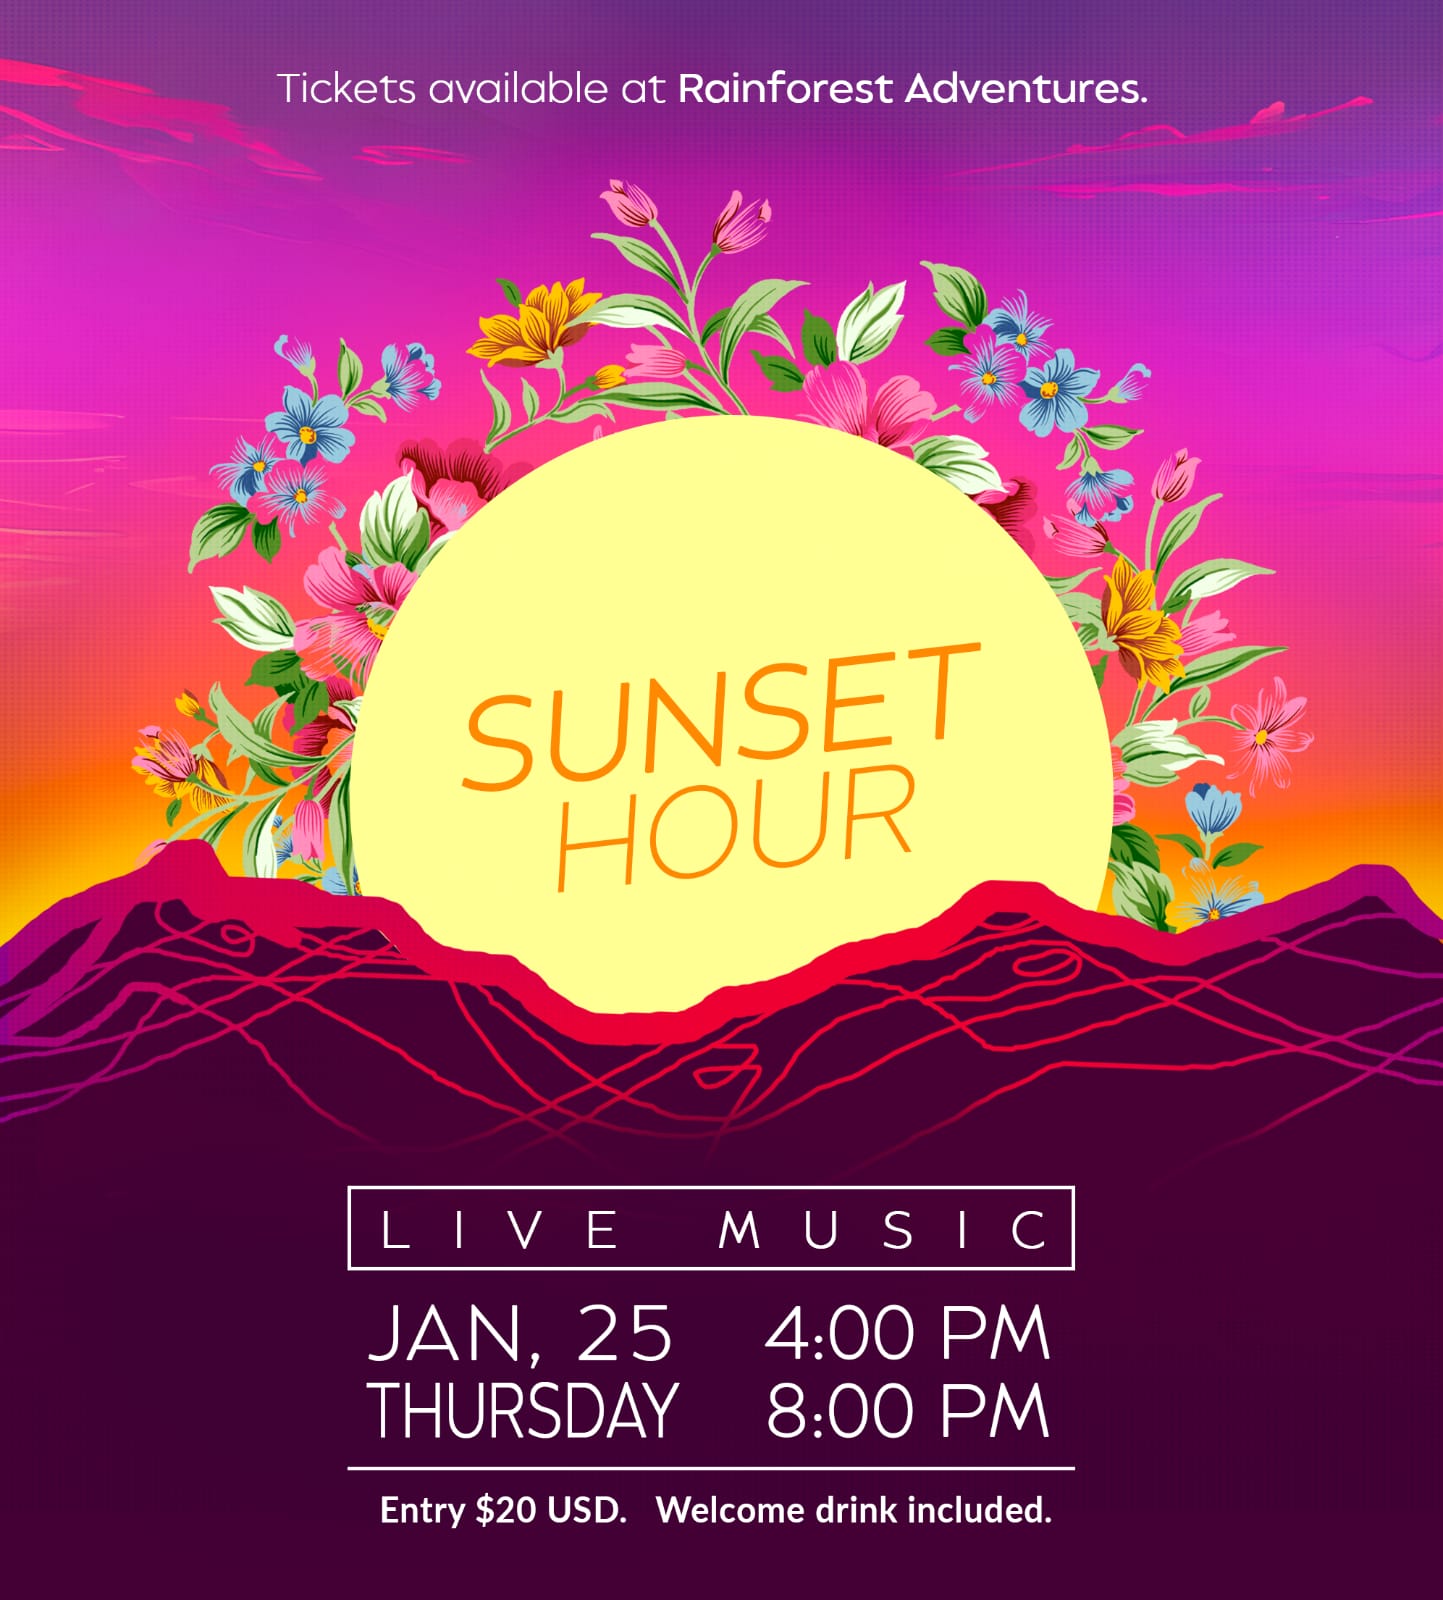 Flyer for the sunset hour at Rainforest Adventures sxm